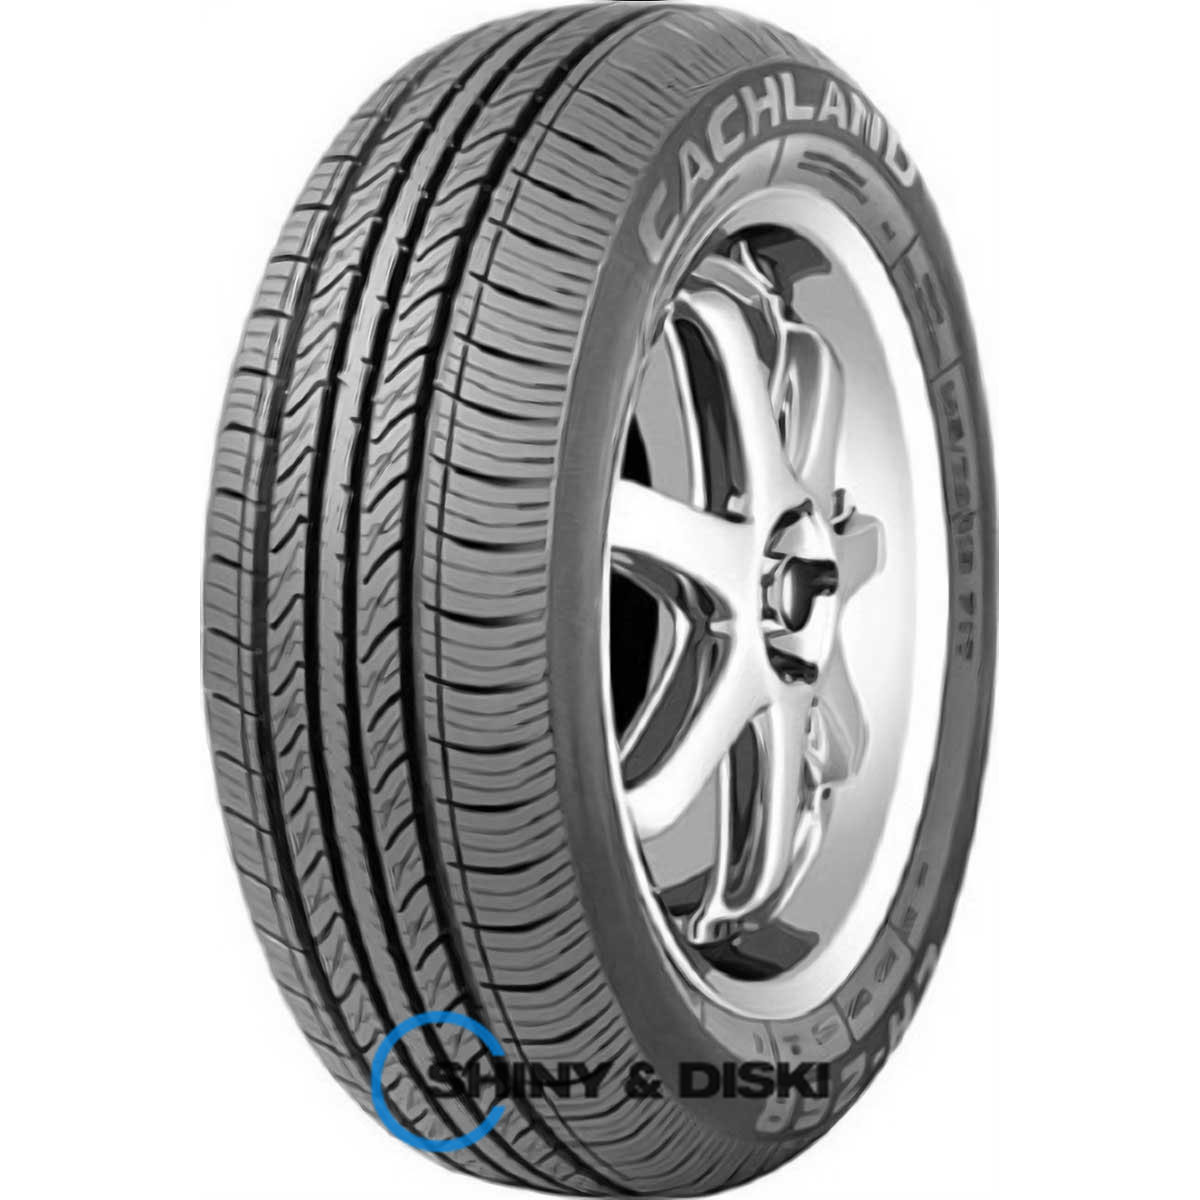 cachland ch-268 165/65 r14 79t